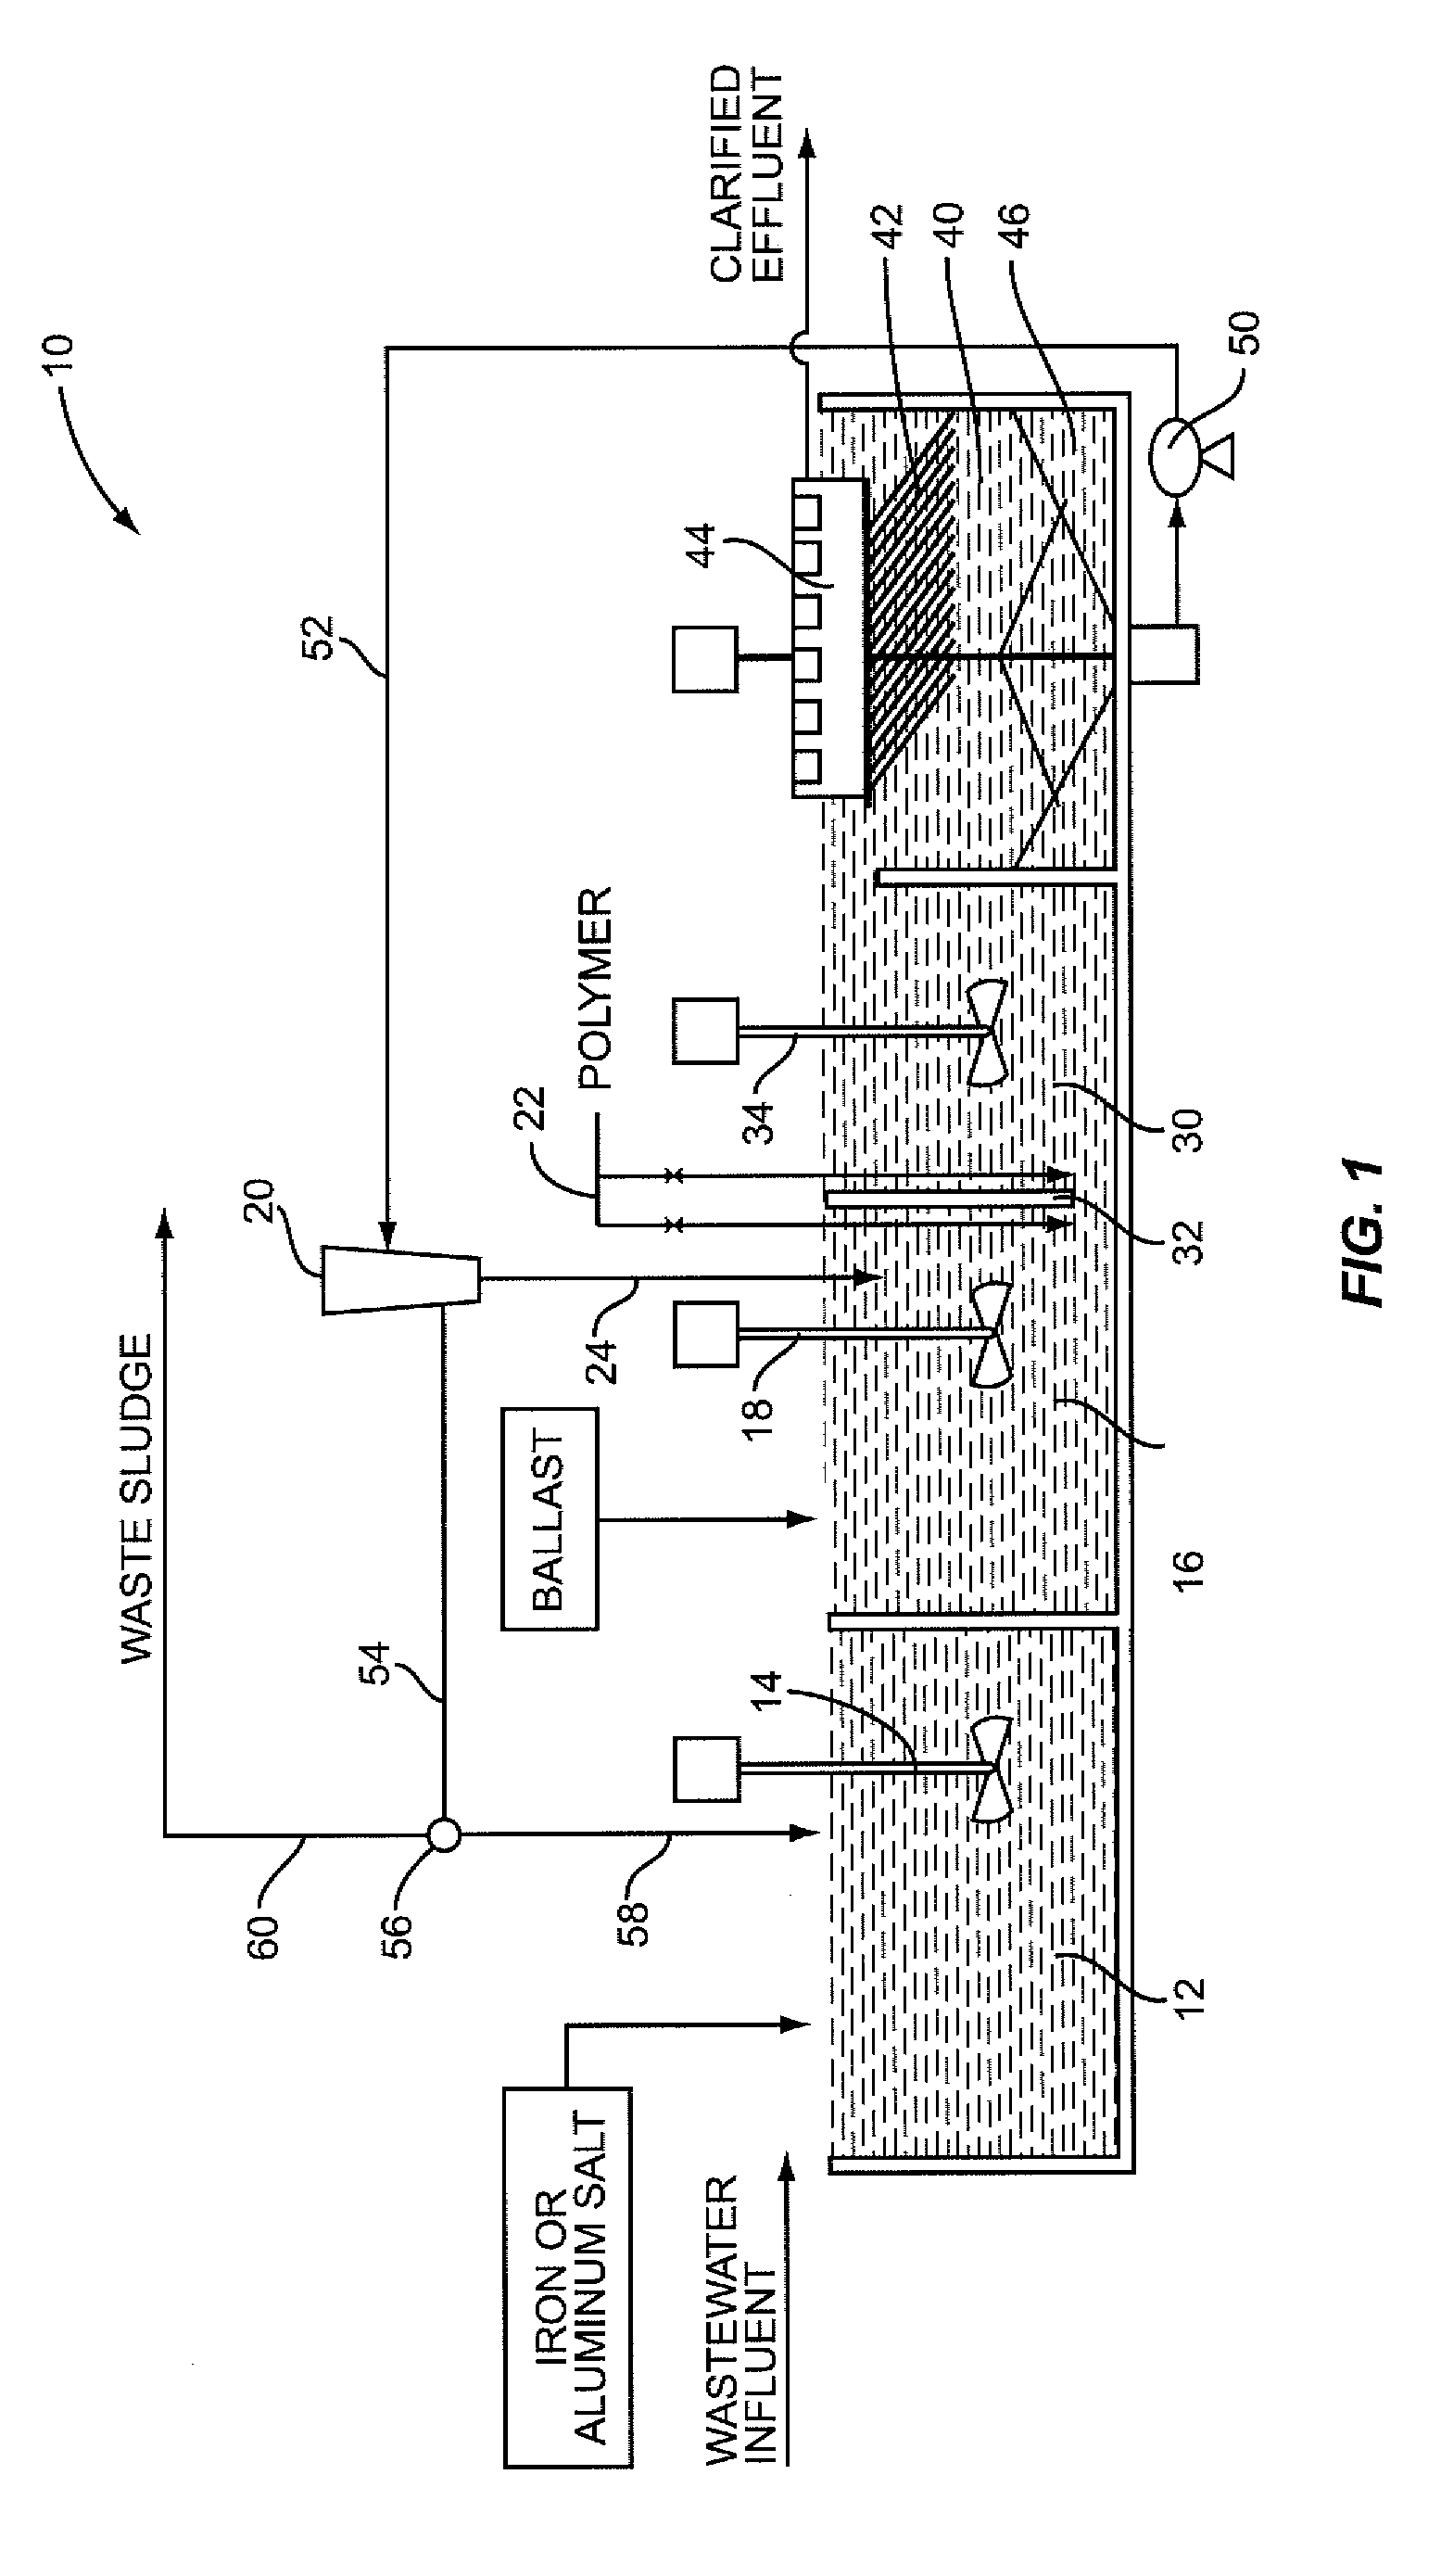 Method of Removing Phosphorus from Wastewater